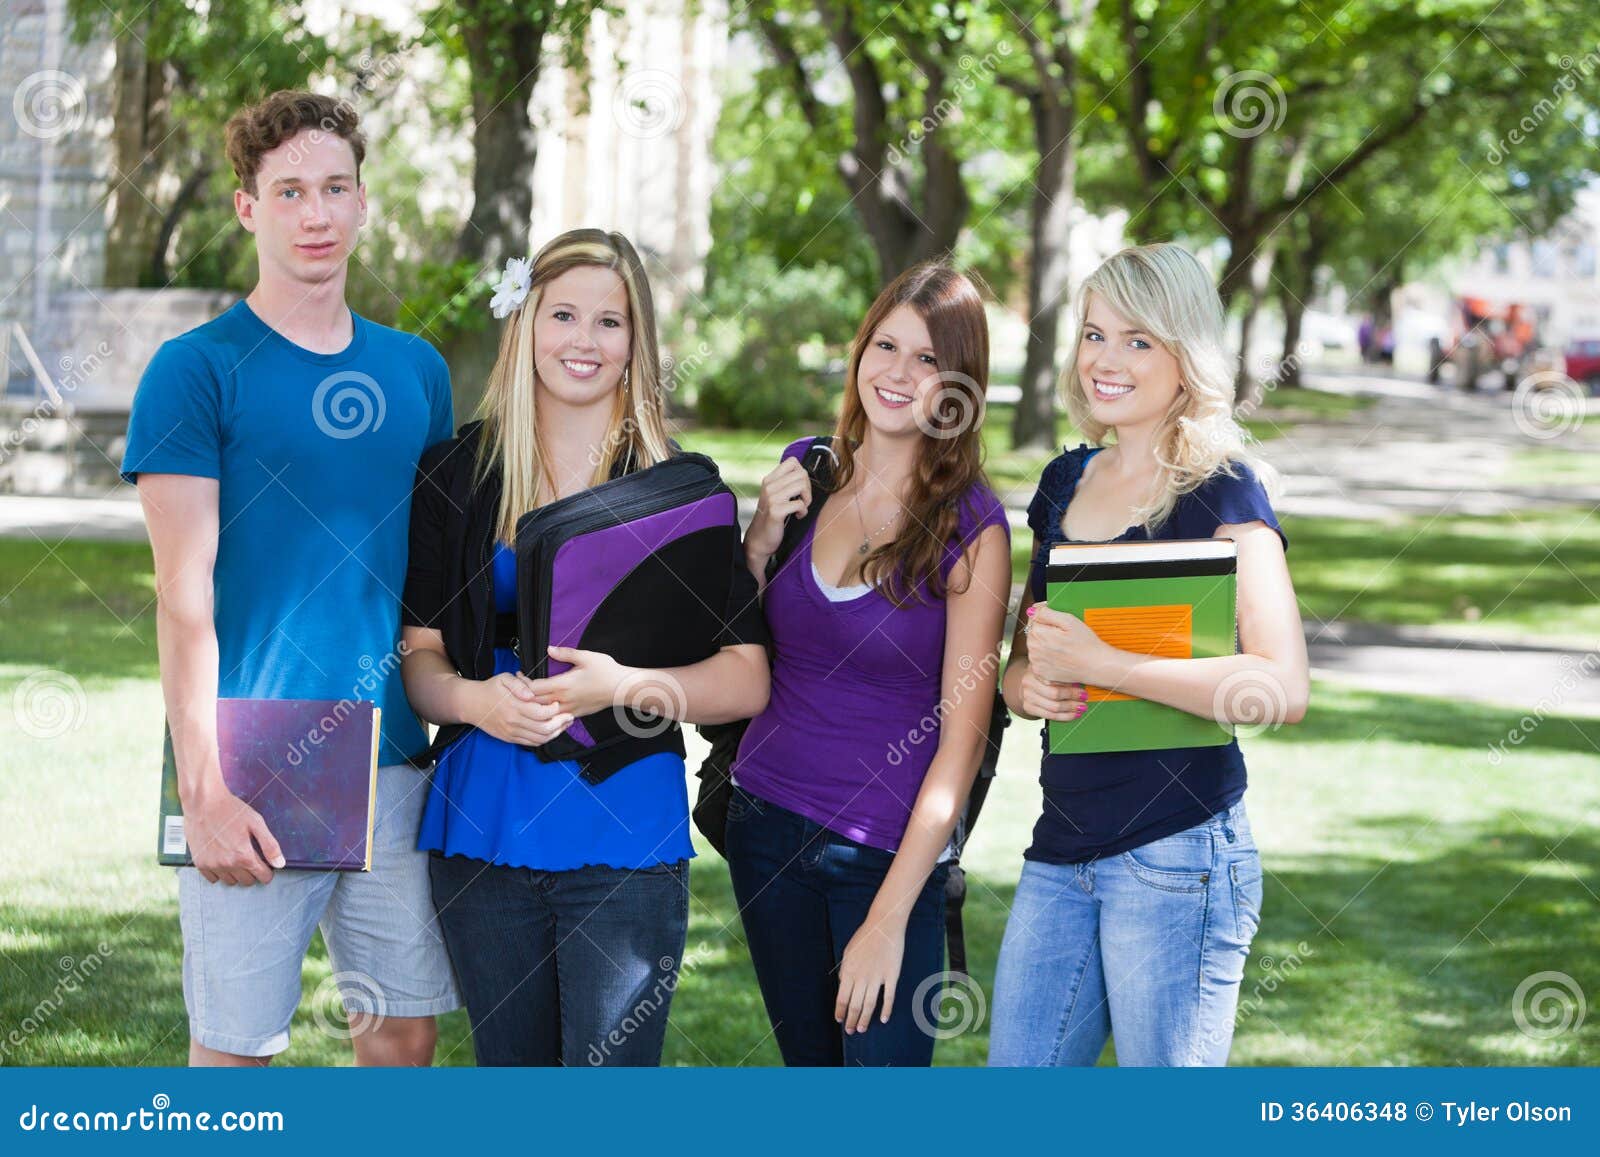 College students on campus stock photo. Image of park - 36406348